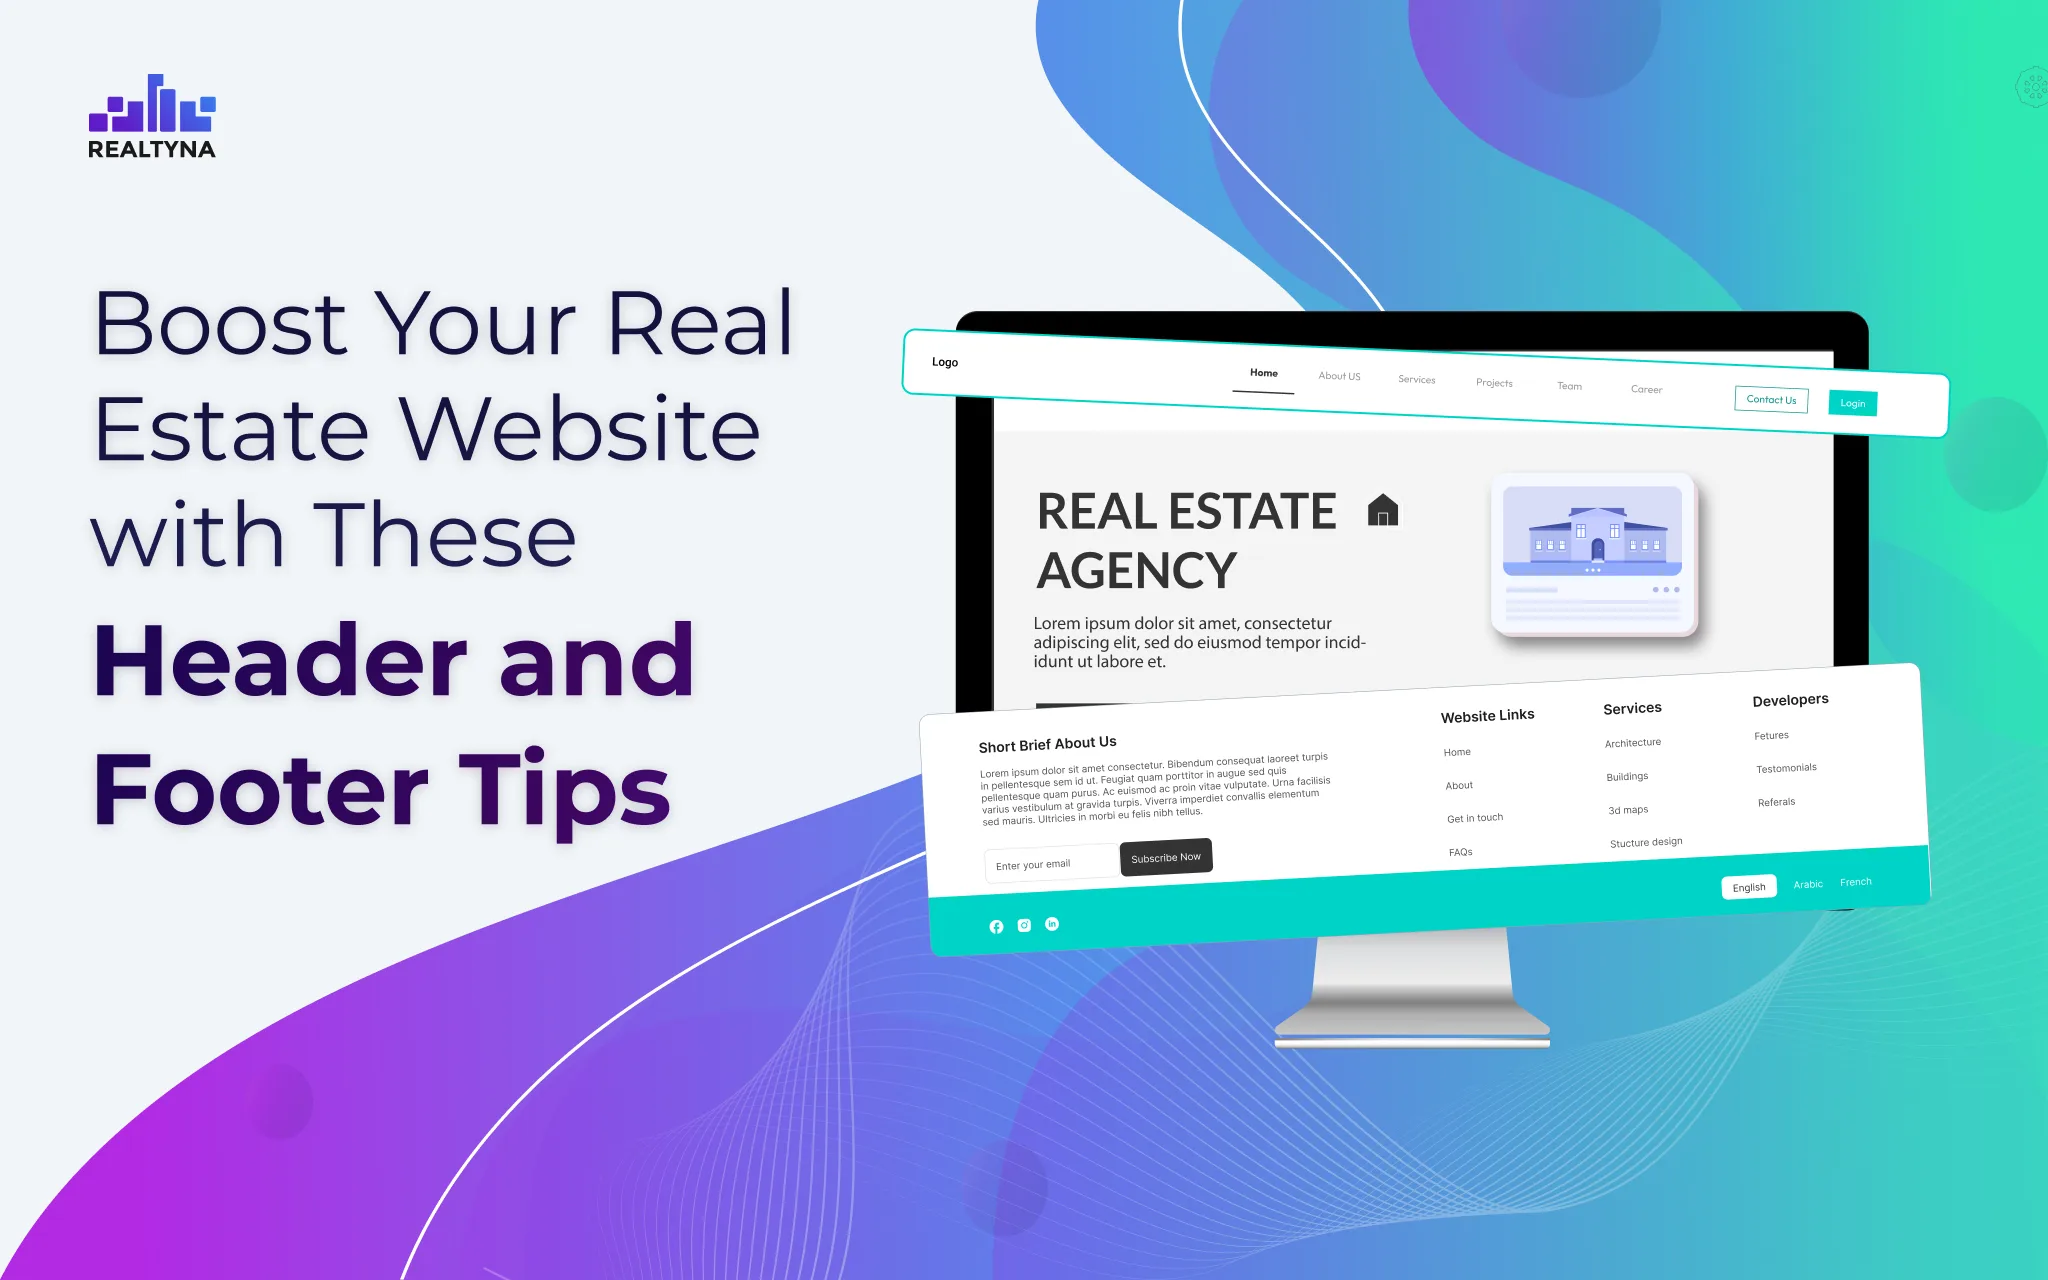 Boost Your Real Estate Website with These Header and Footer Tips